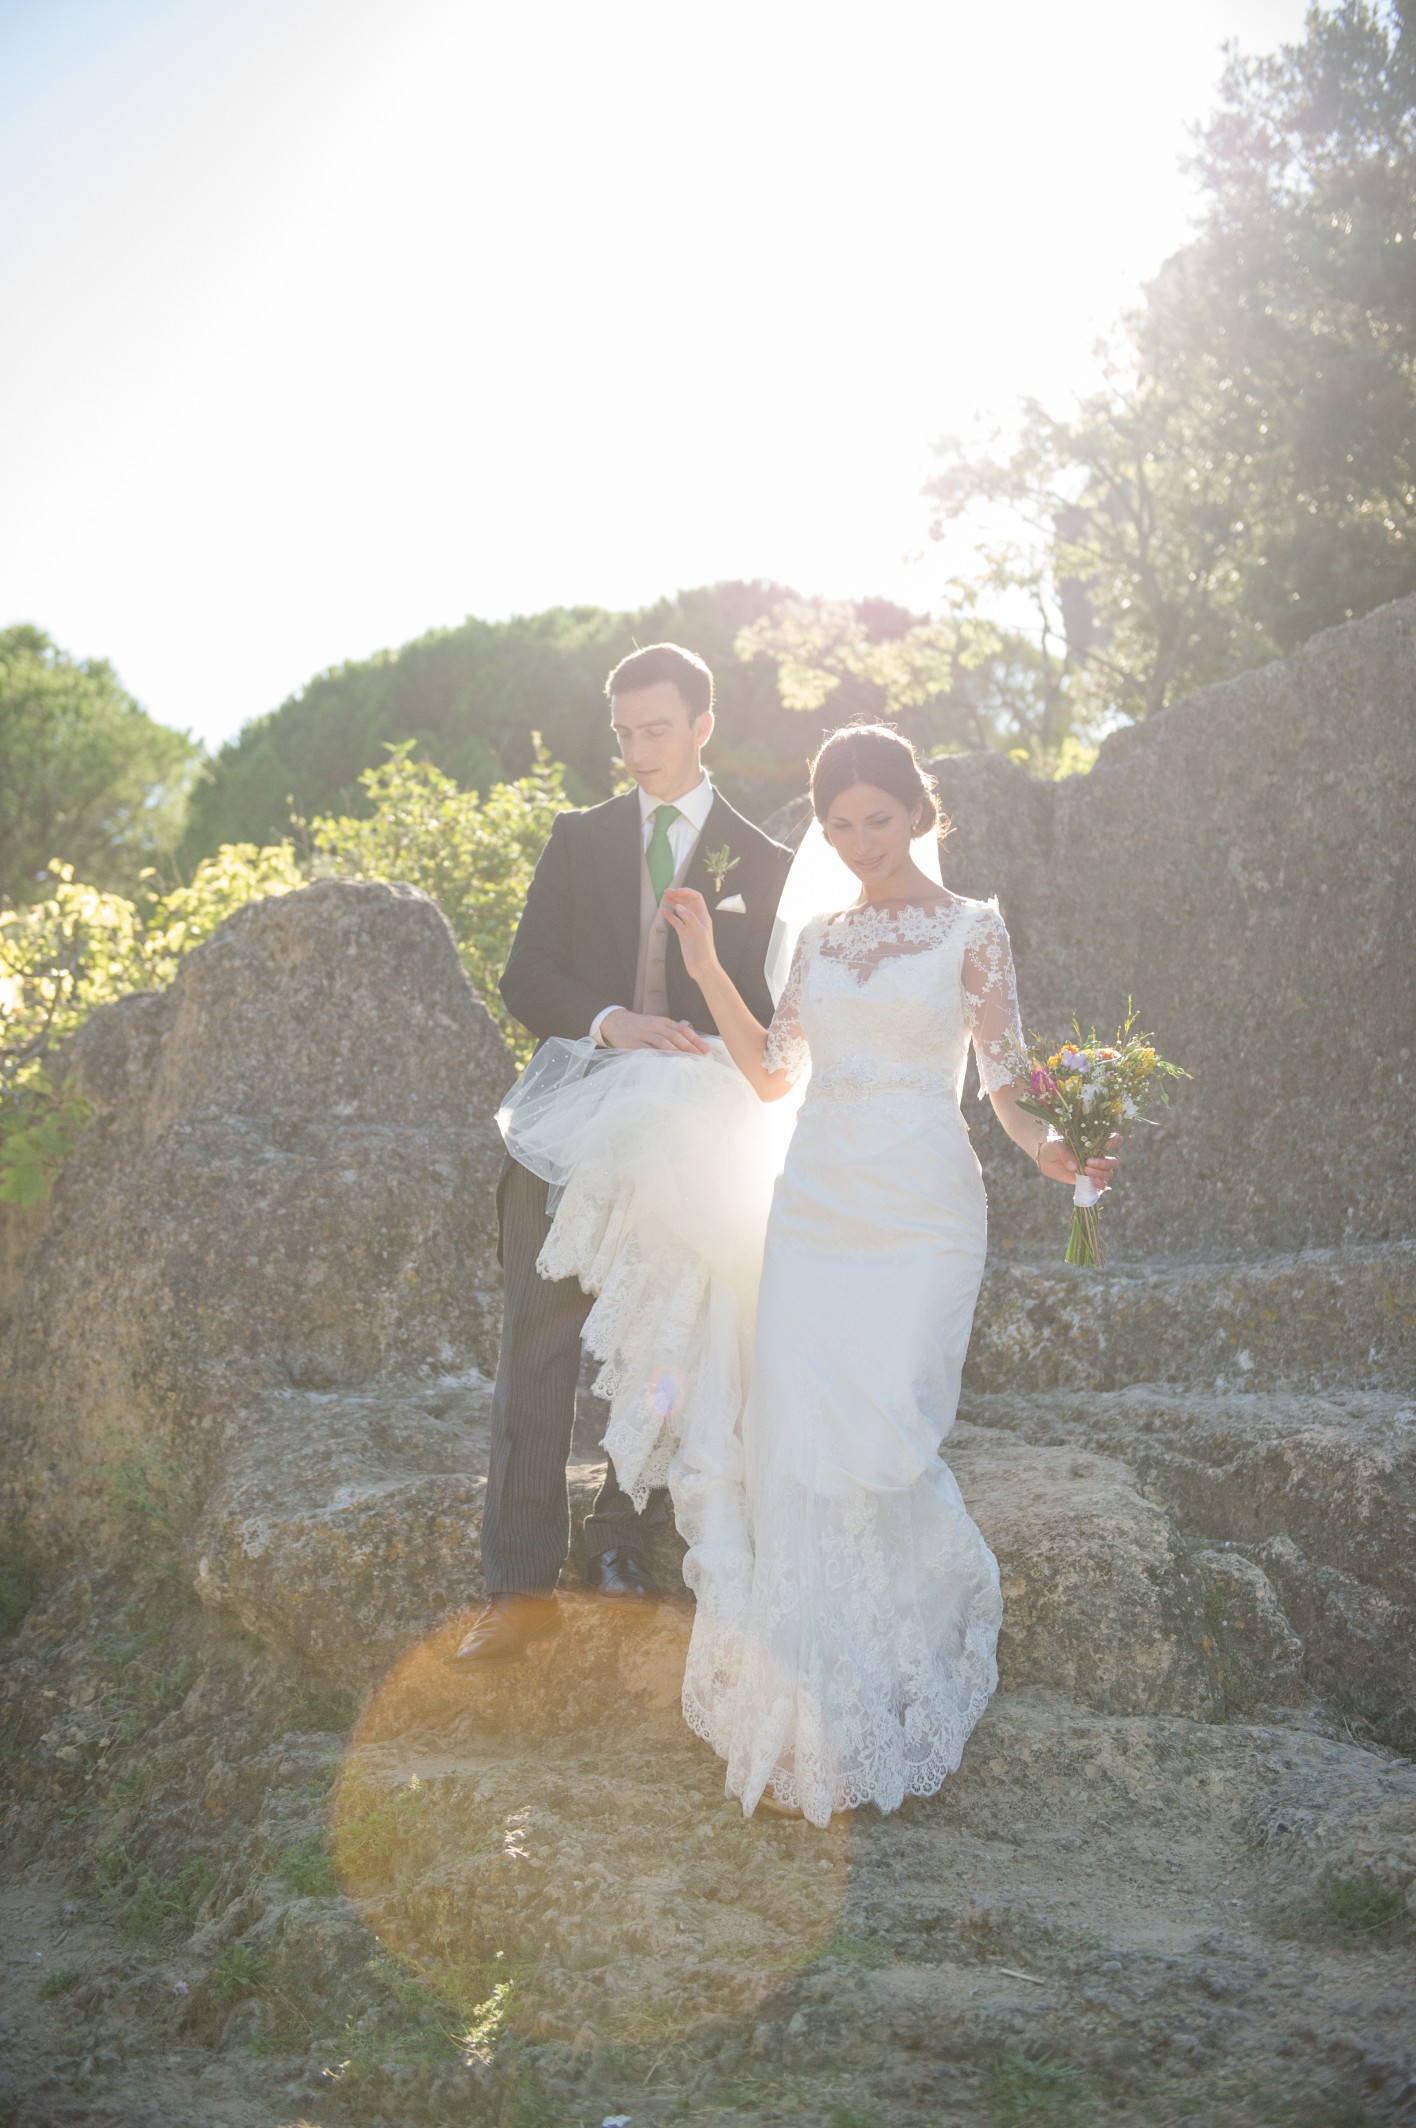 Wedding photography - South of France wedding - the bride and groom